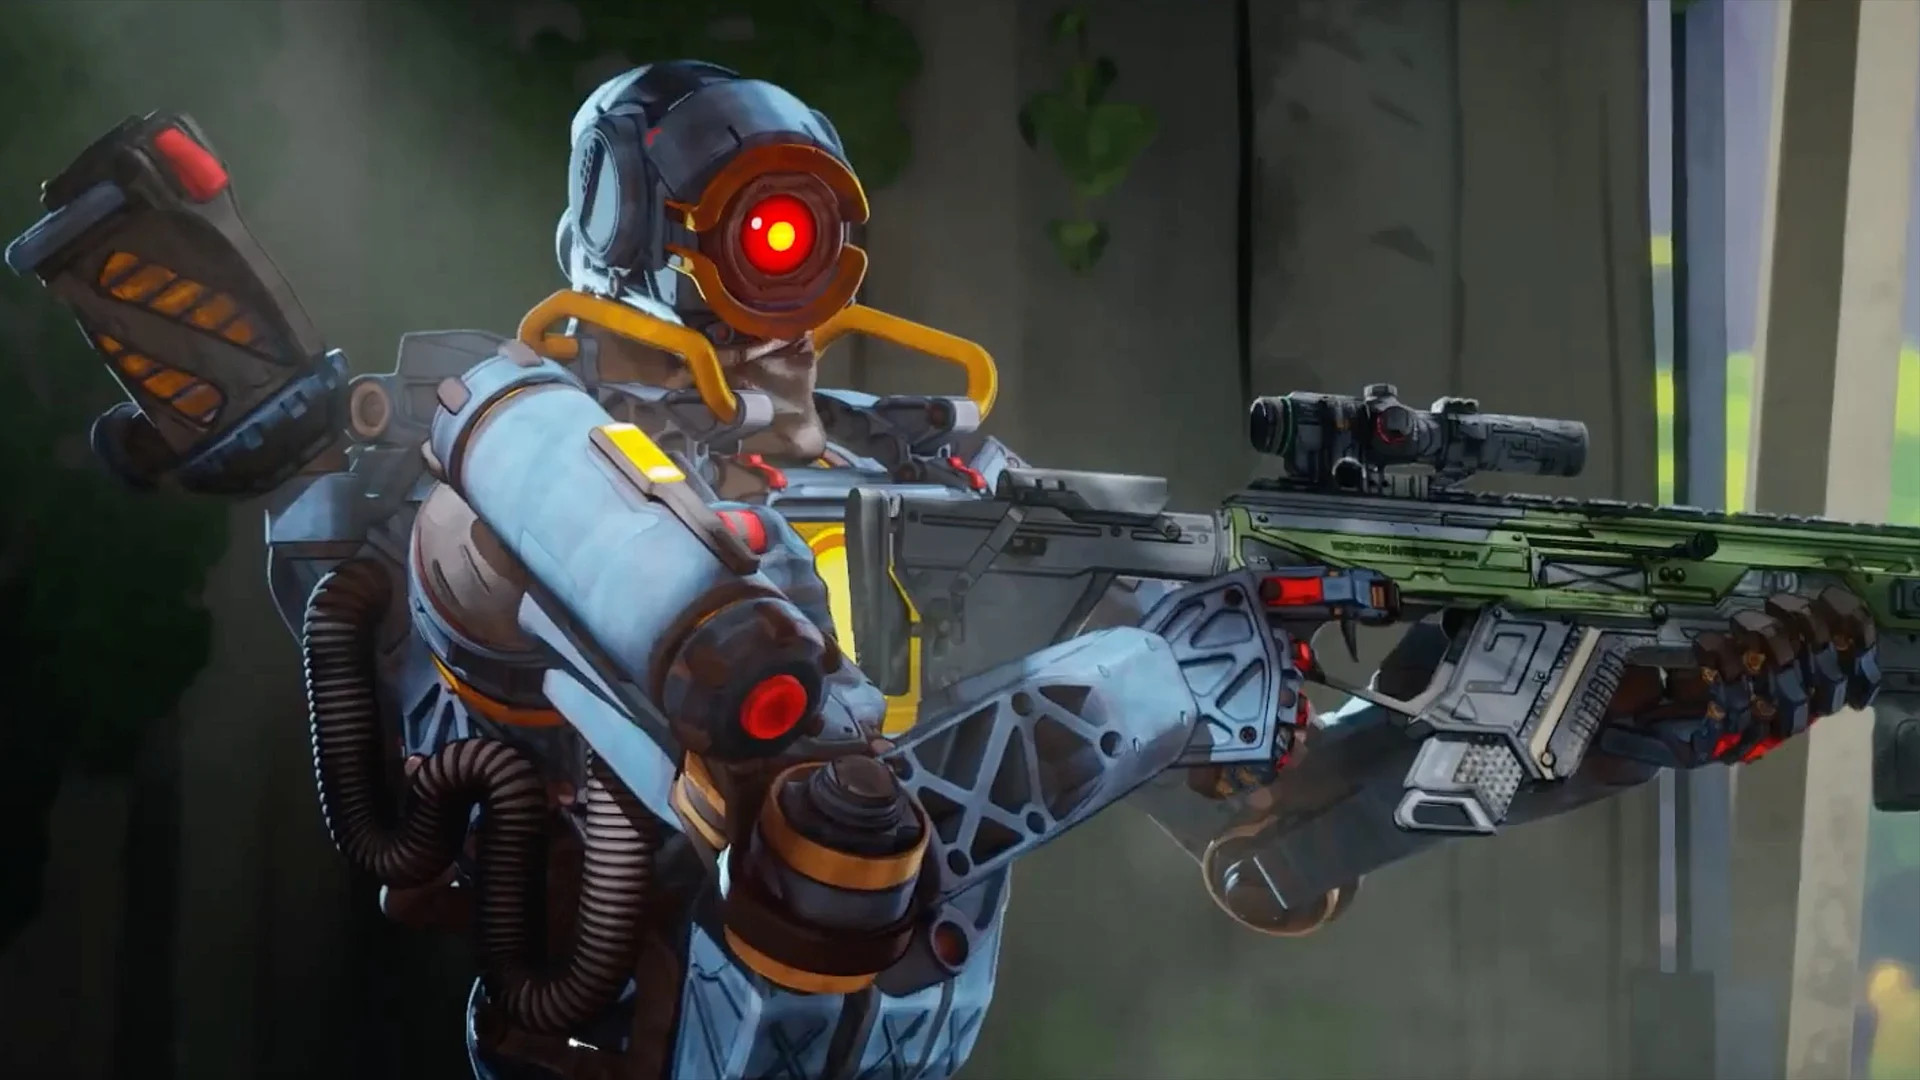 Free shooting games: Apex Legends. A screnshot shows a Pathfinder holds a sniper rifle